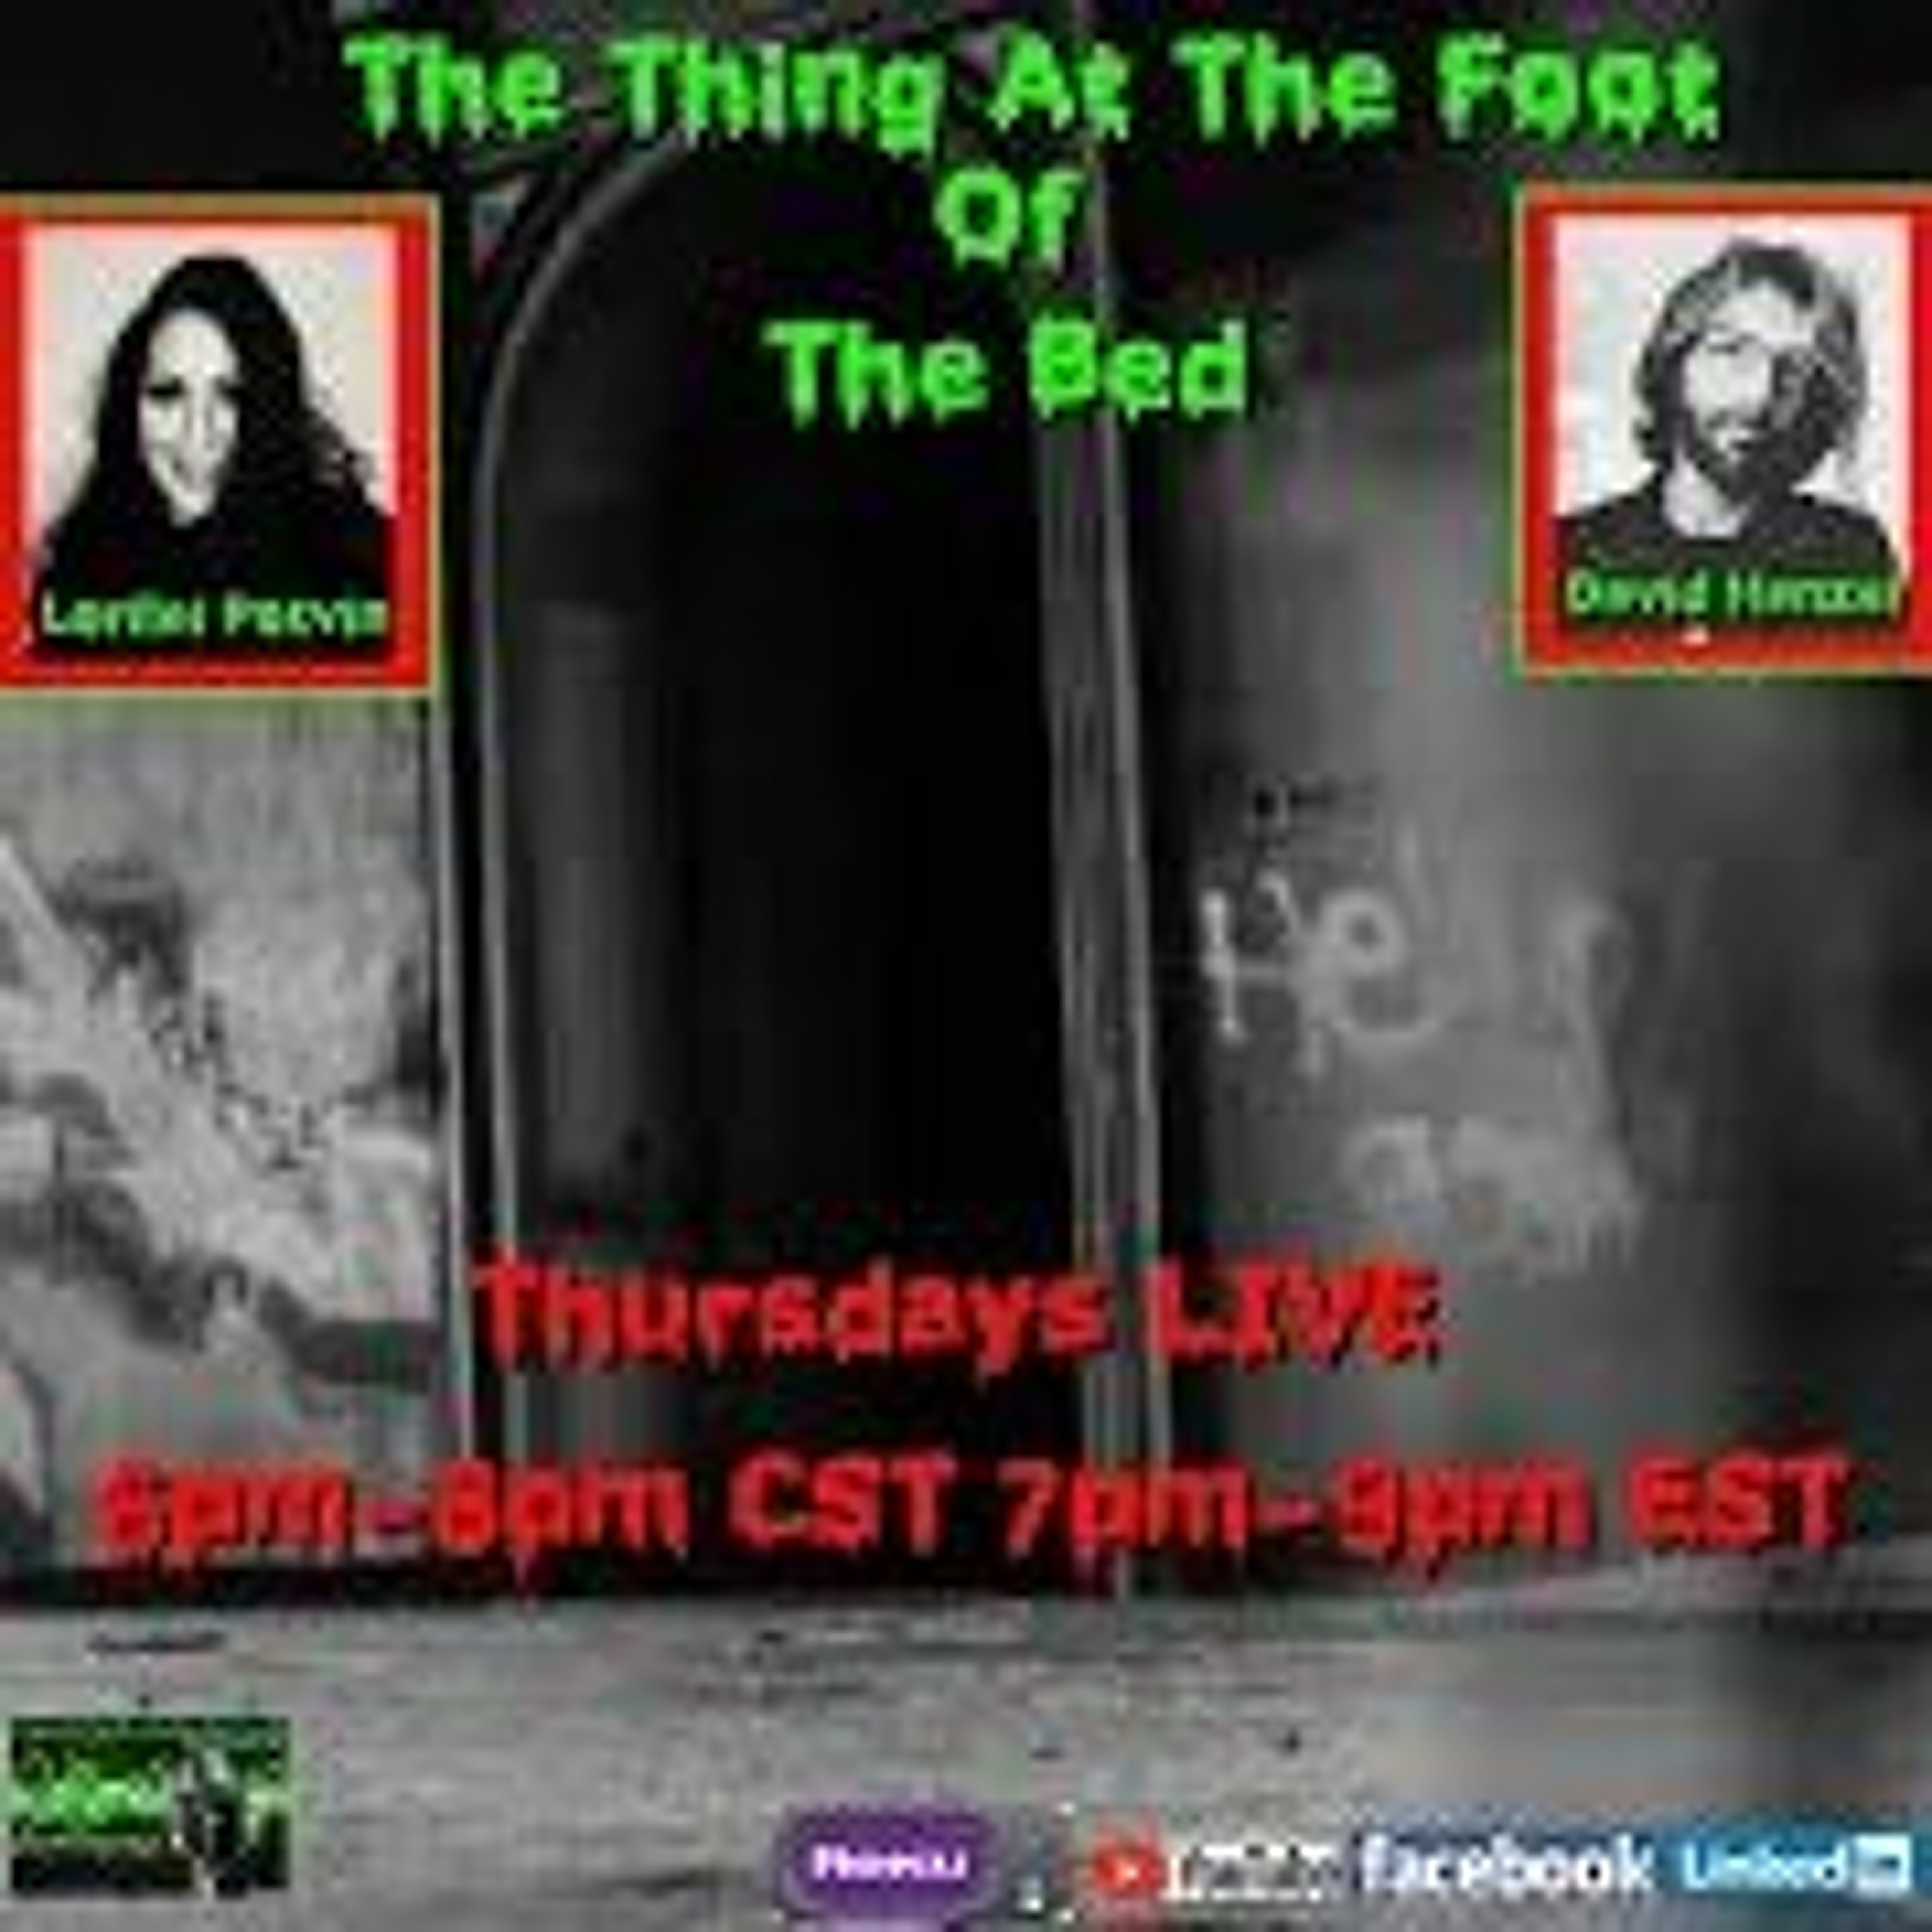 The Thing At The Foot Of The Bed With Lorilei Potvin & David Hanzel 55